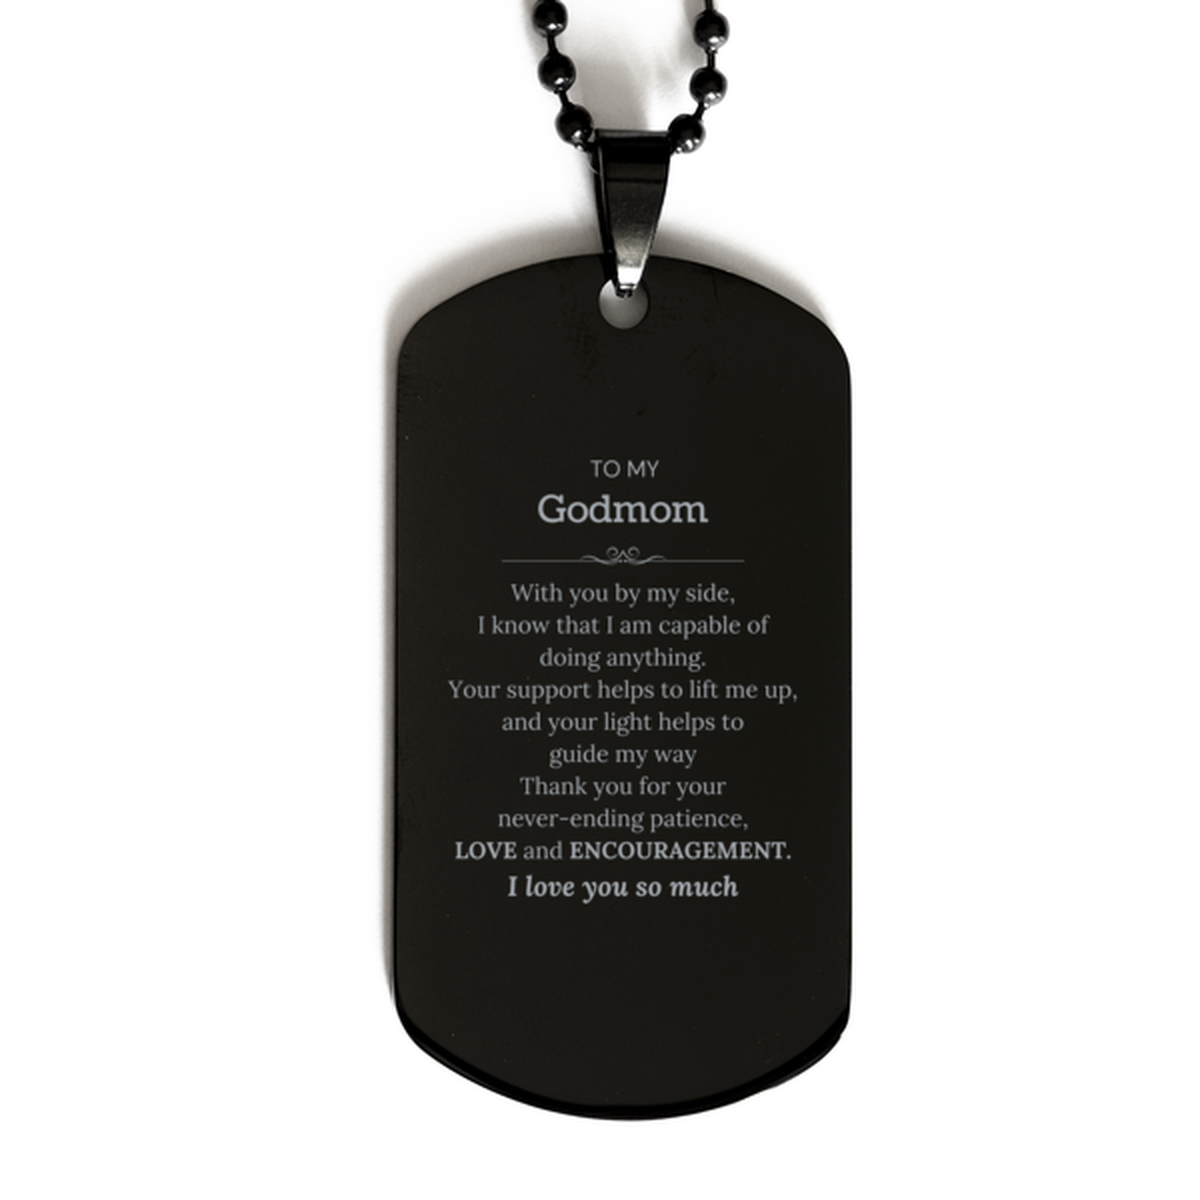 Appreciation Godmom Black Dog Tag Gifts, To My Godmom Birthday Christmas Wedding Keepsake Gifts for Godmom With you by my side, I know that I am capable of doing anything. I love you so much